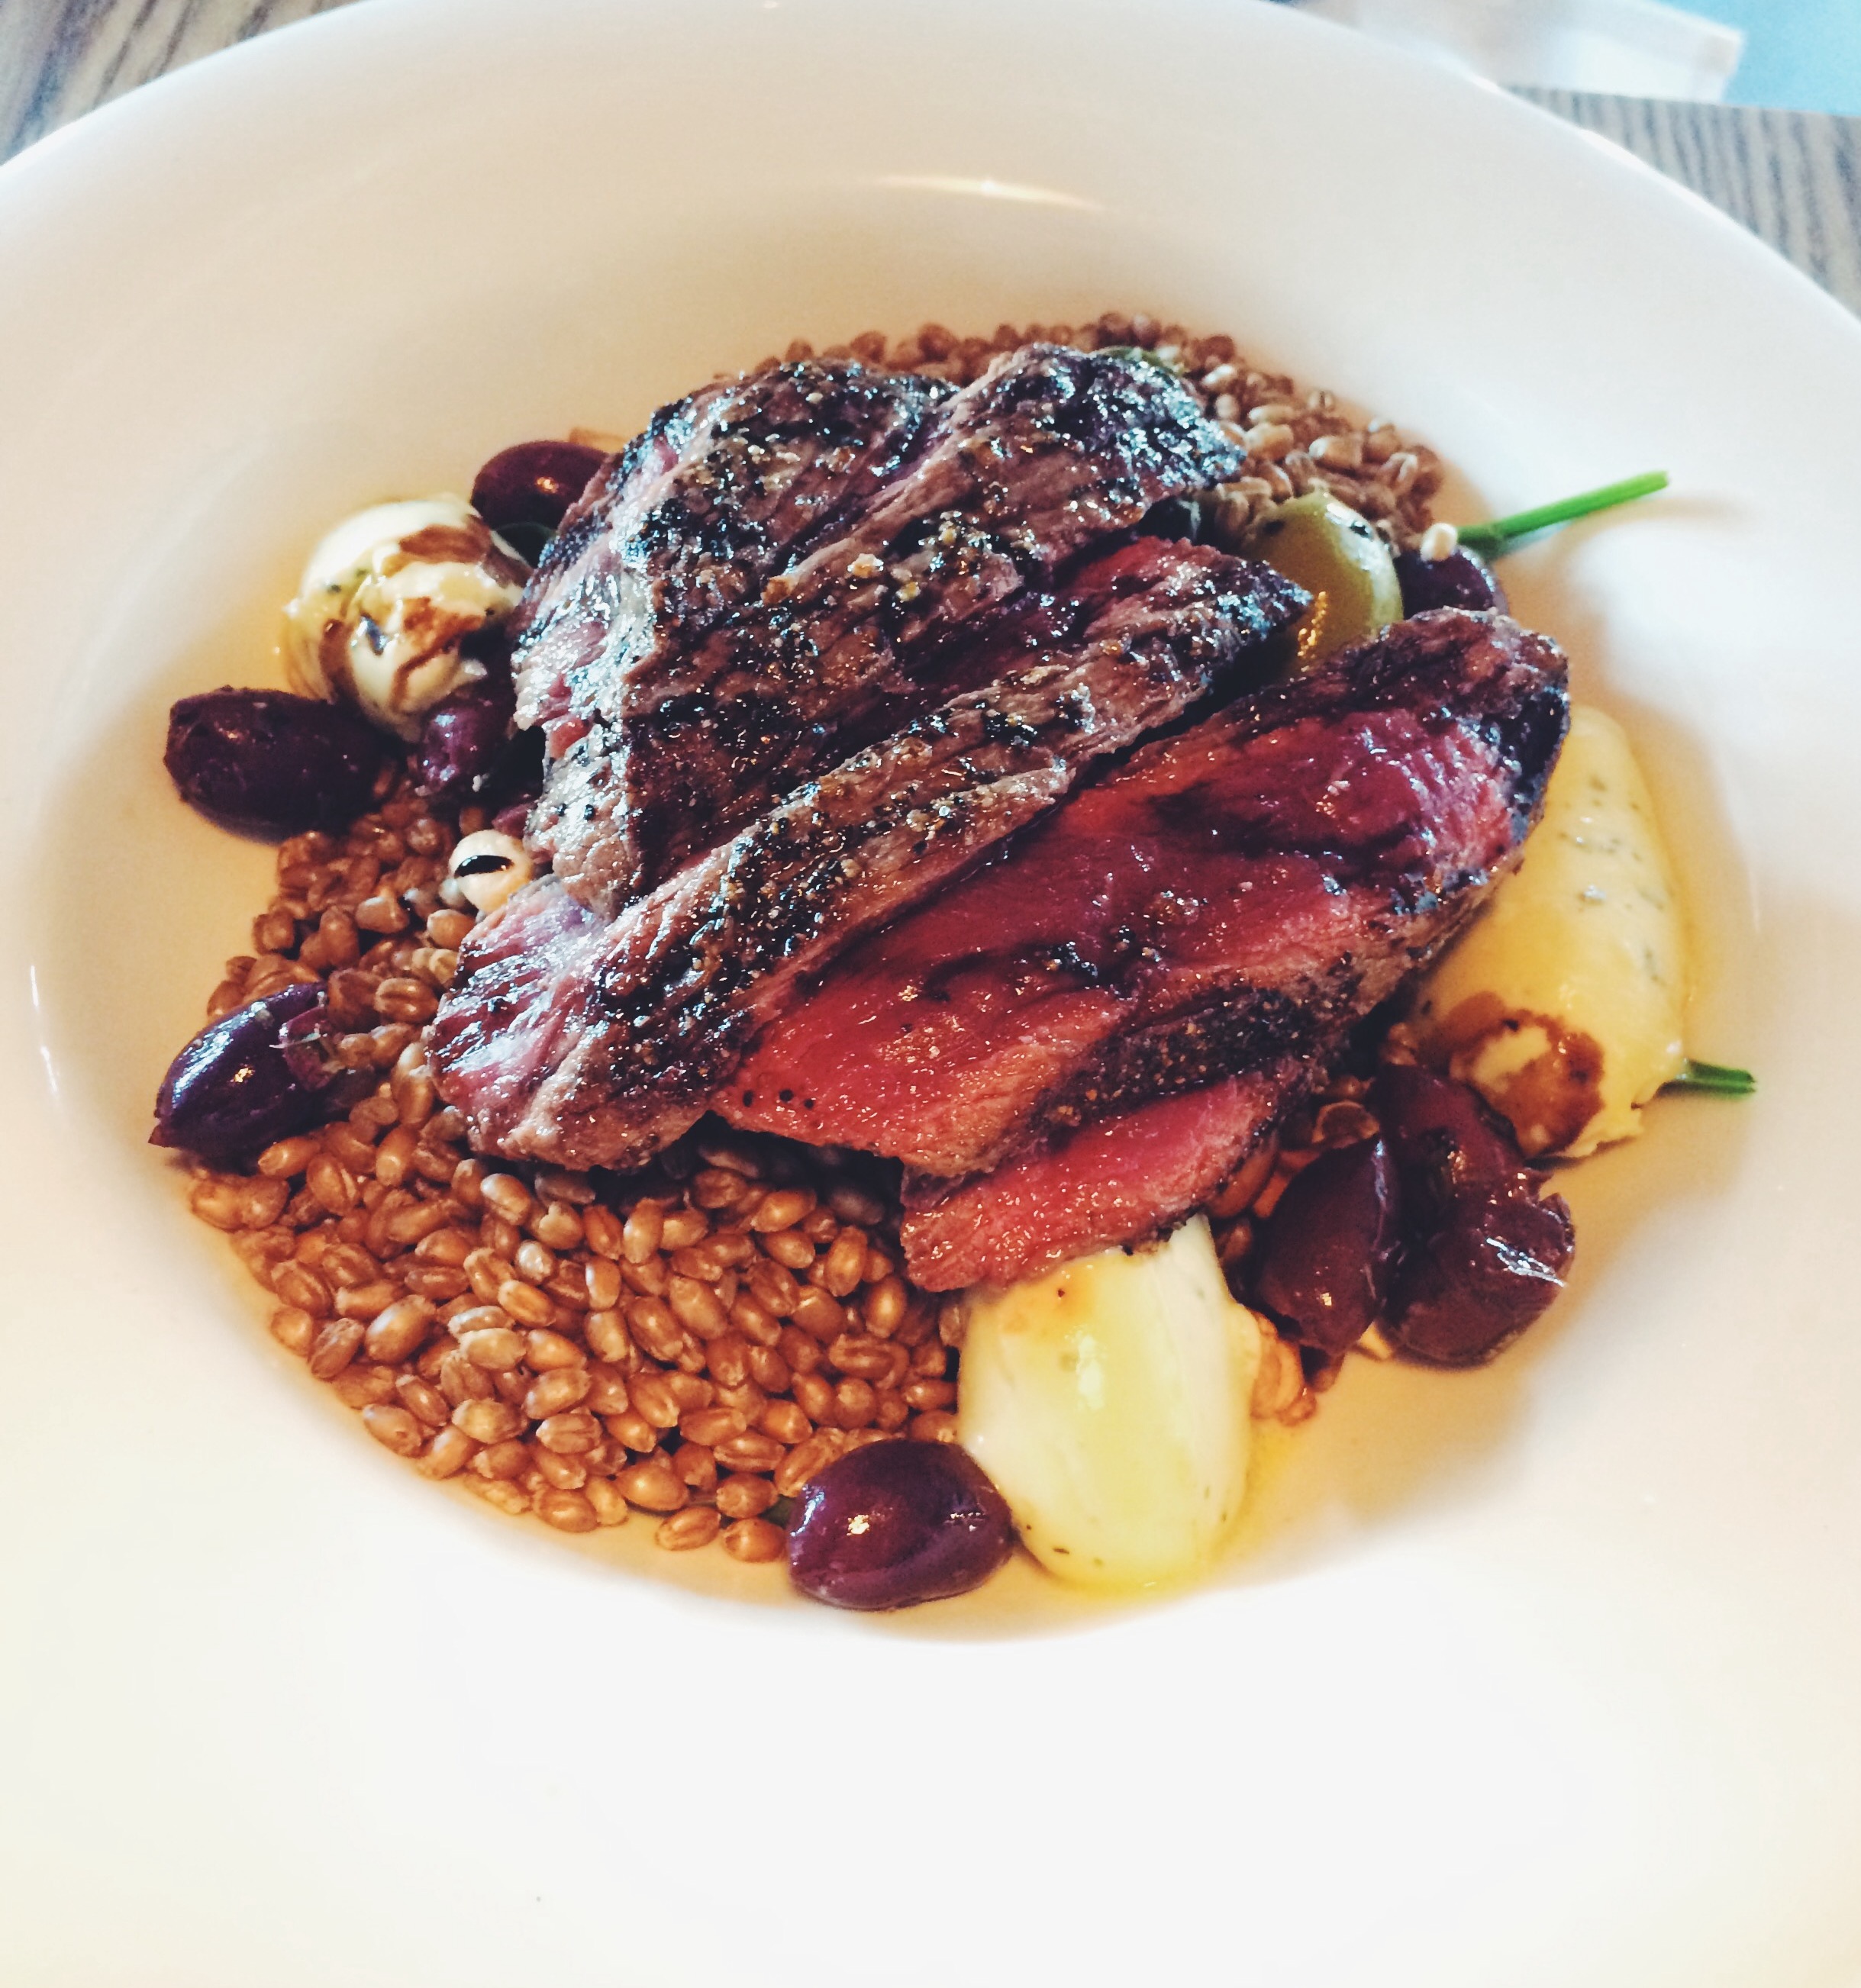 Seared venison, baby spinach, toasted cashews, marinated olives, freekeh, blue cheese dressing, balsamic reduction $35